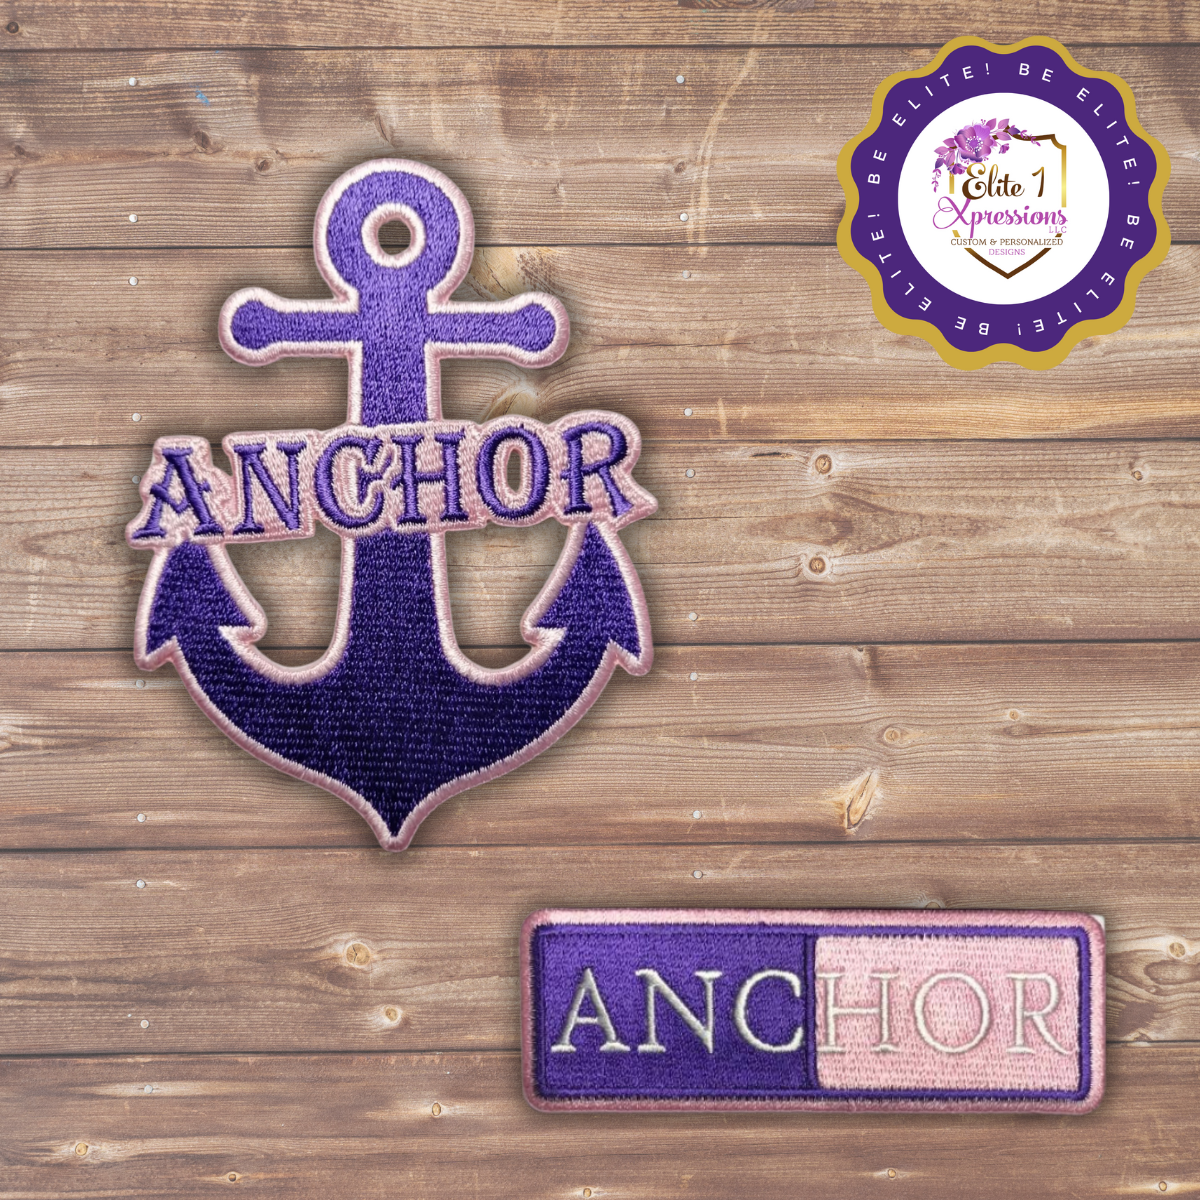 (KEY) Iron on/Sew on Number & Name Tag Patch Set, Embroidered Patch